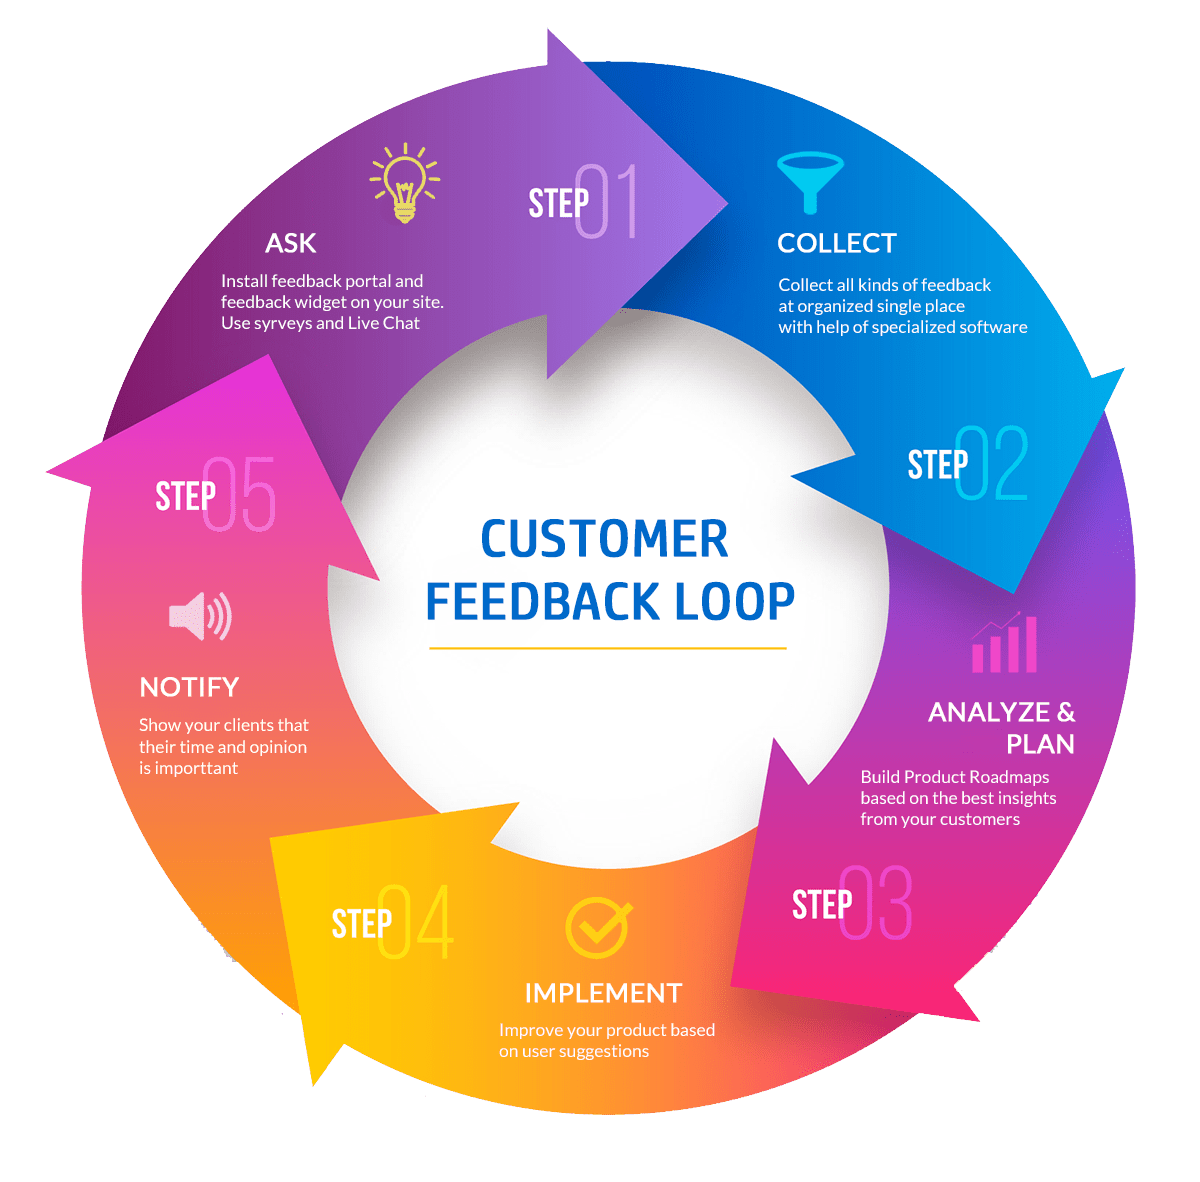 Product Development. Product Development Stages. User feedback. New product Development. Step user